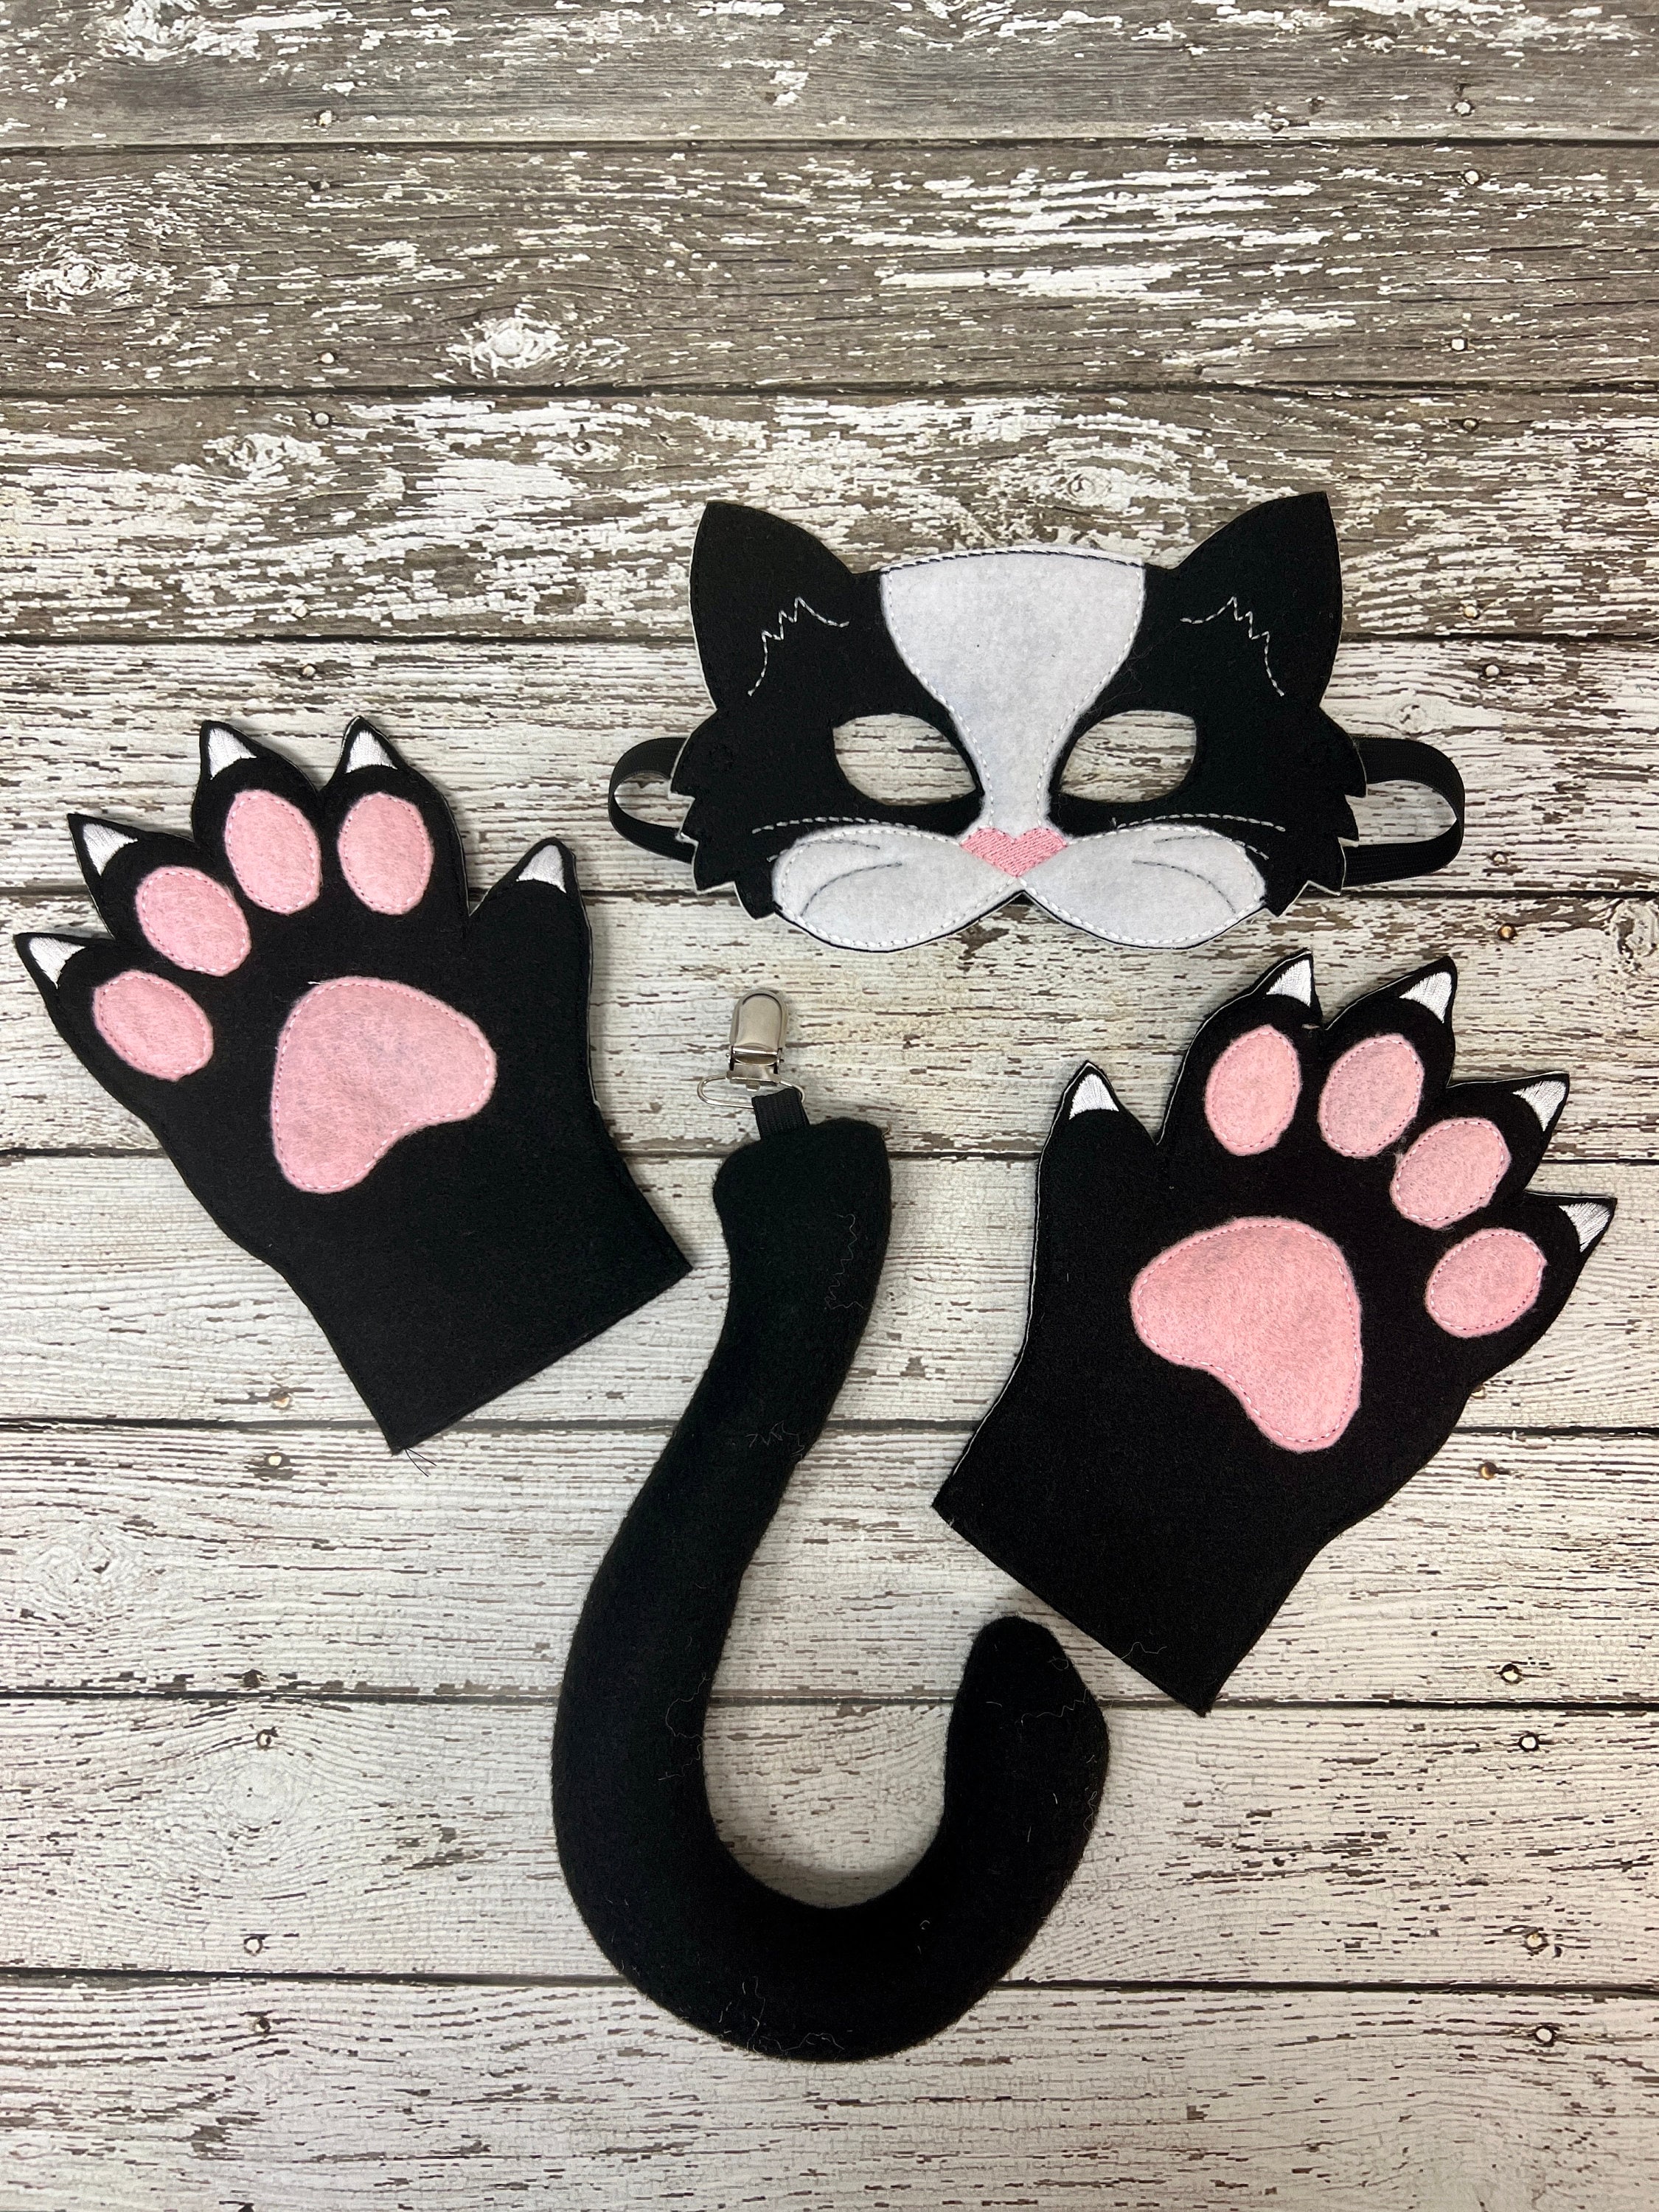 Furry Cat Girl Gifts & Merchandise for Sale